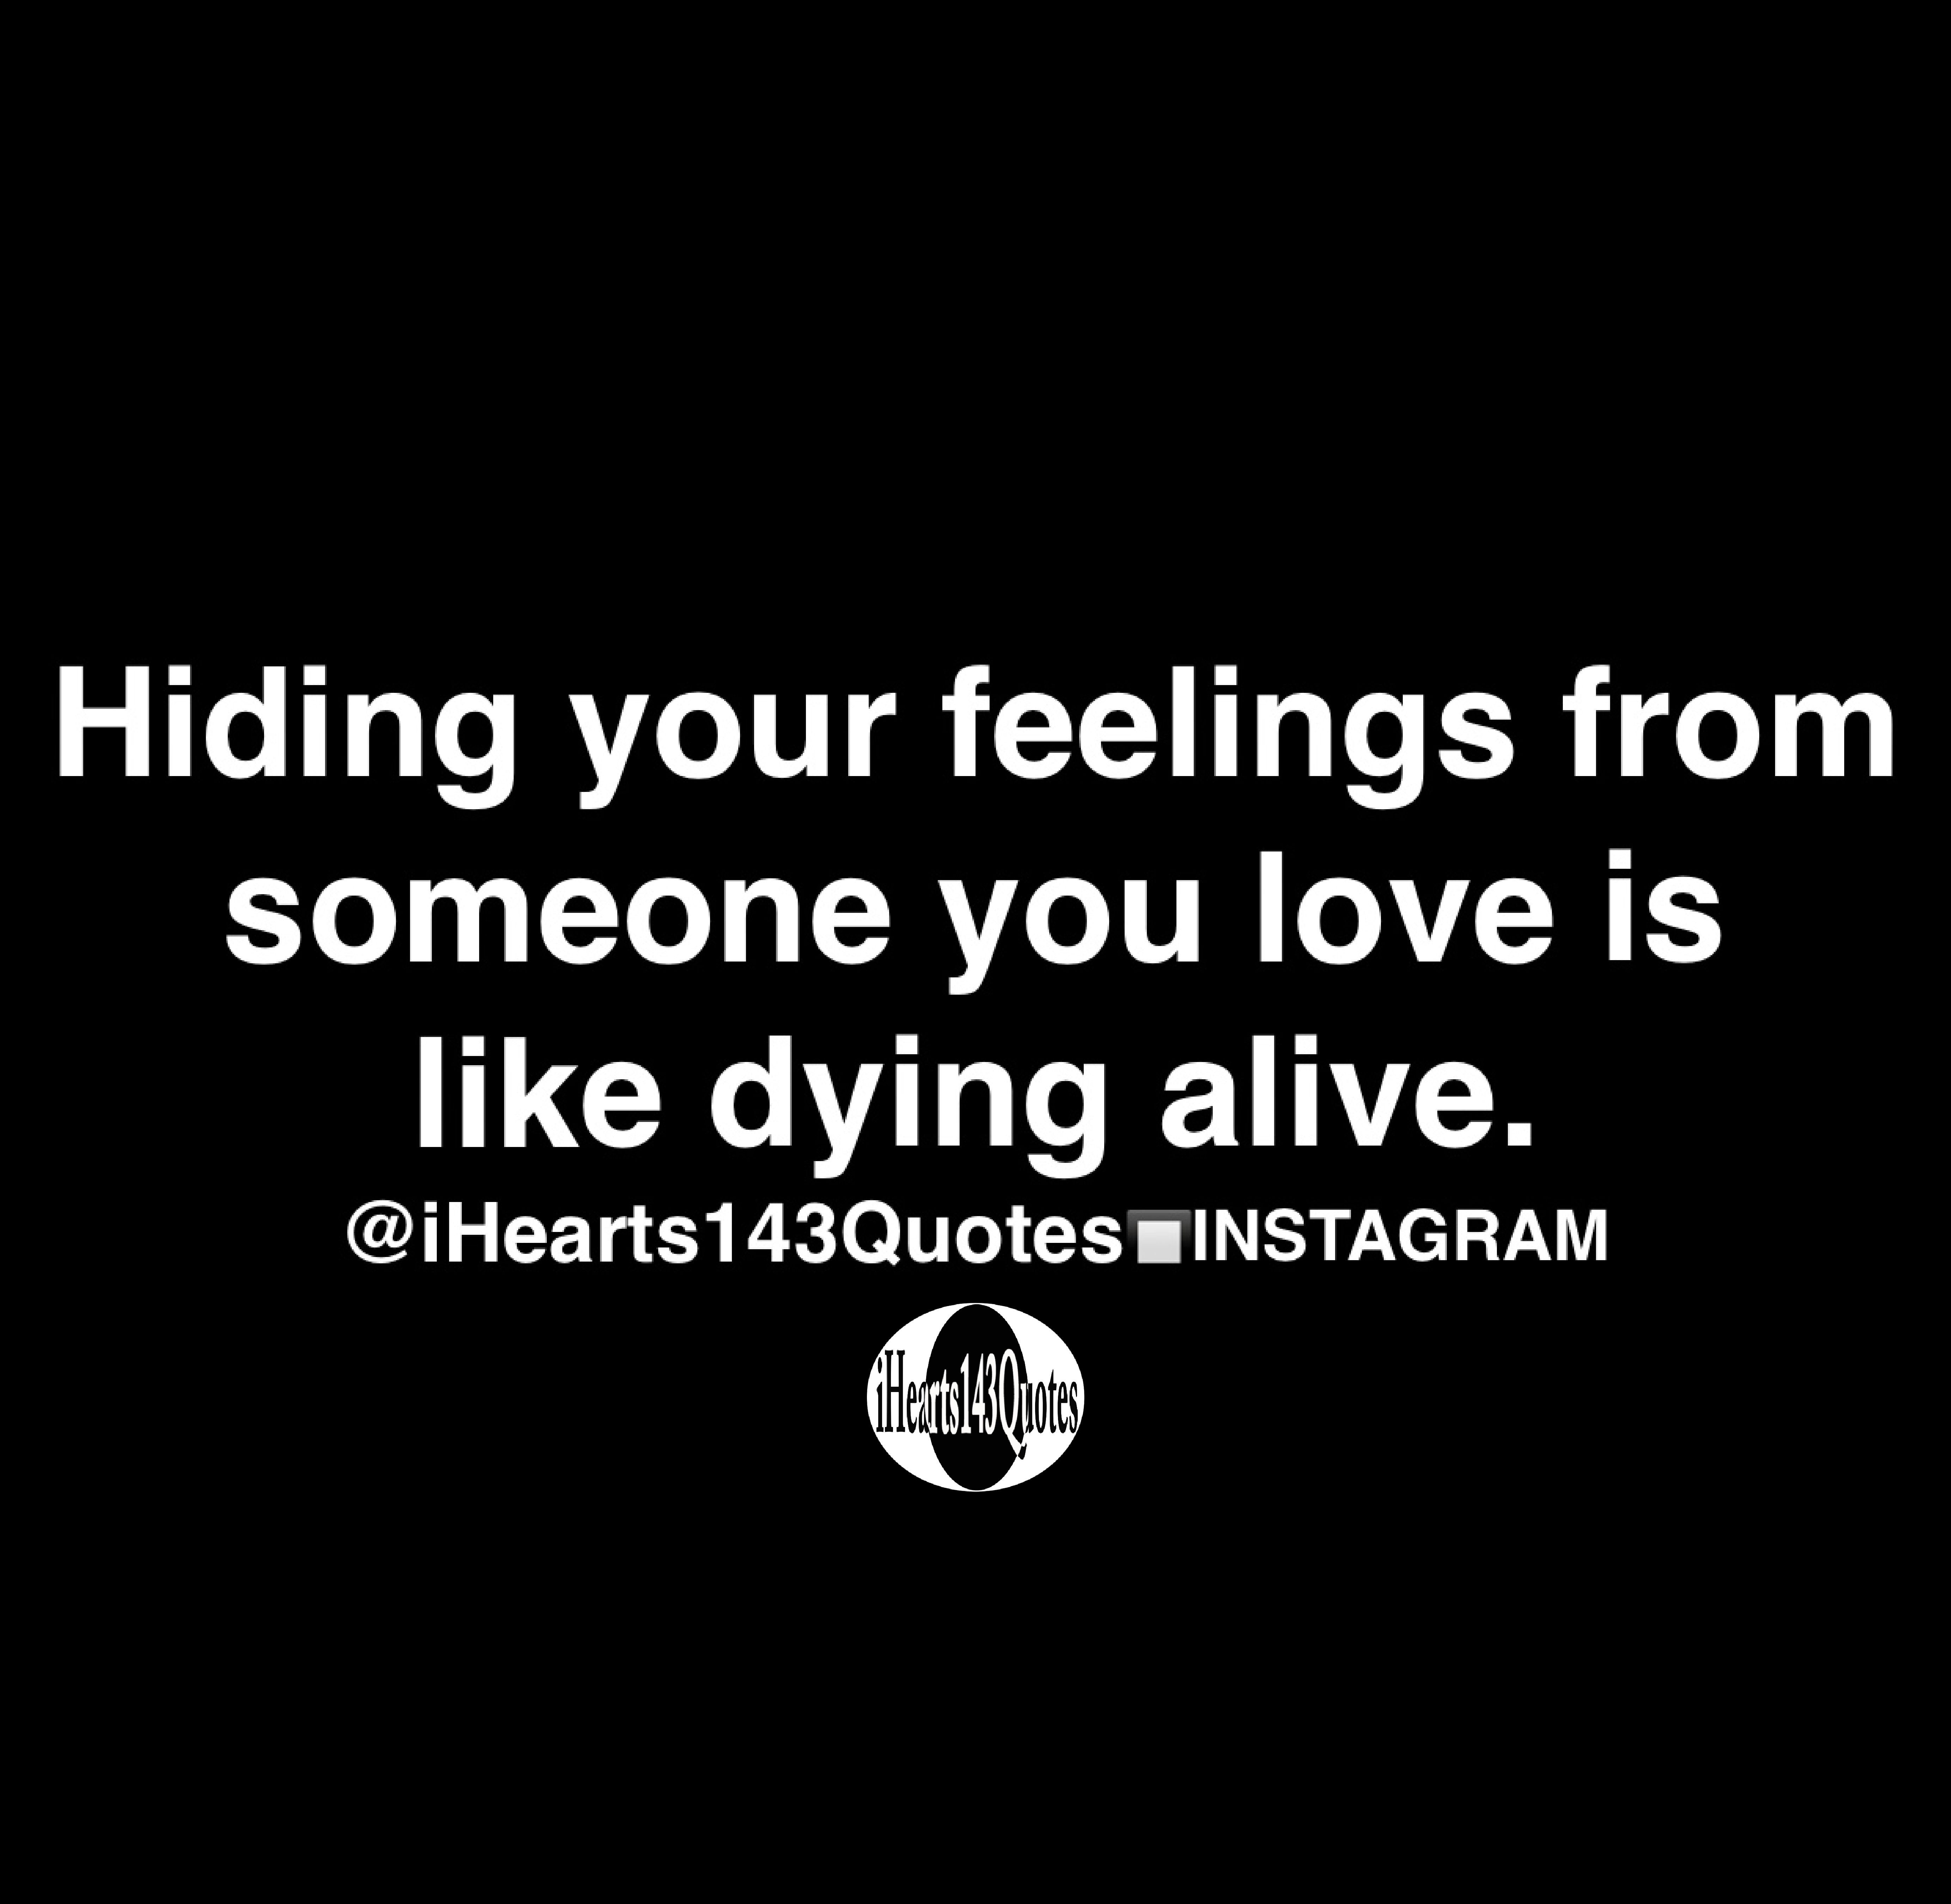 Hiding Your Feelings From Someone You Love Is Like Dying Alive Quotes